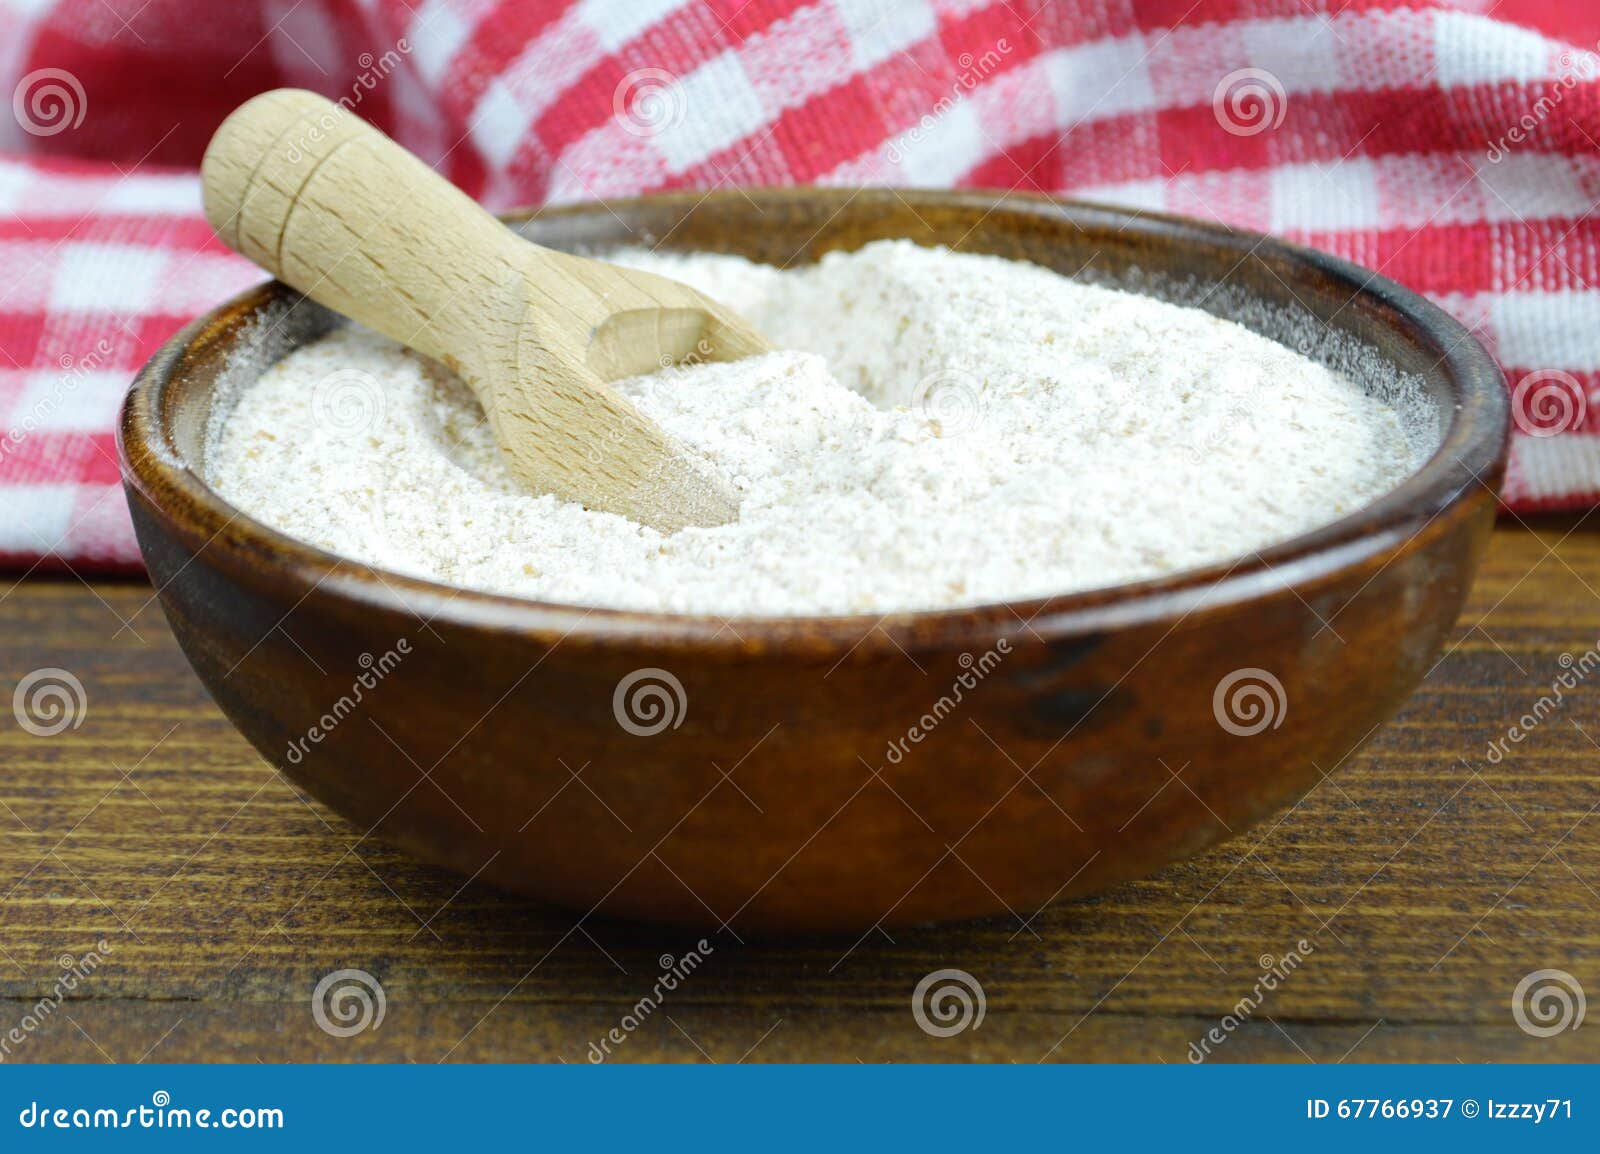 whole wheat flour in wooden bowl